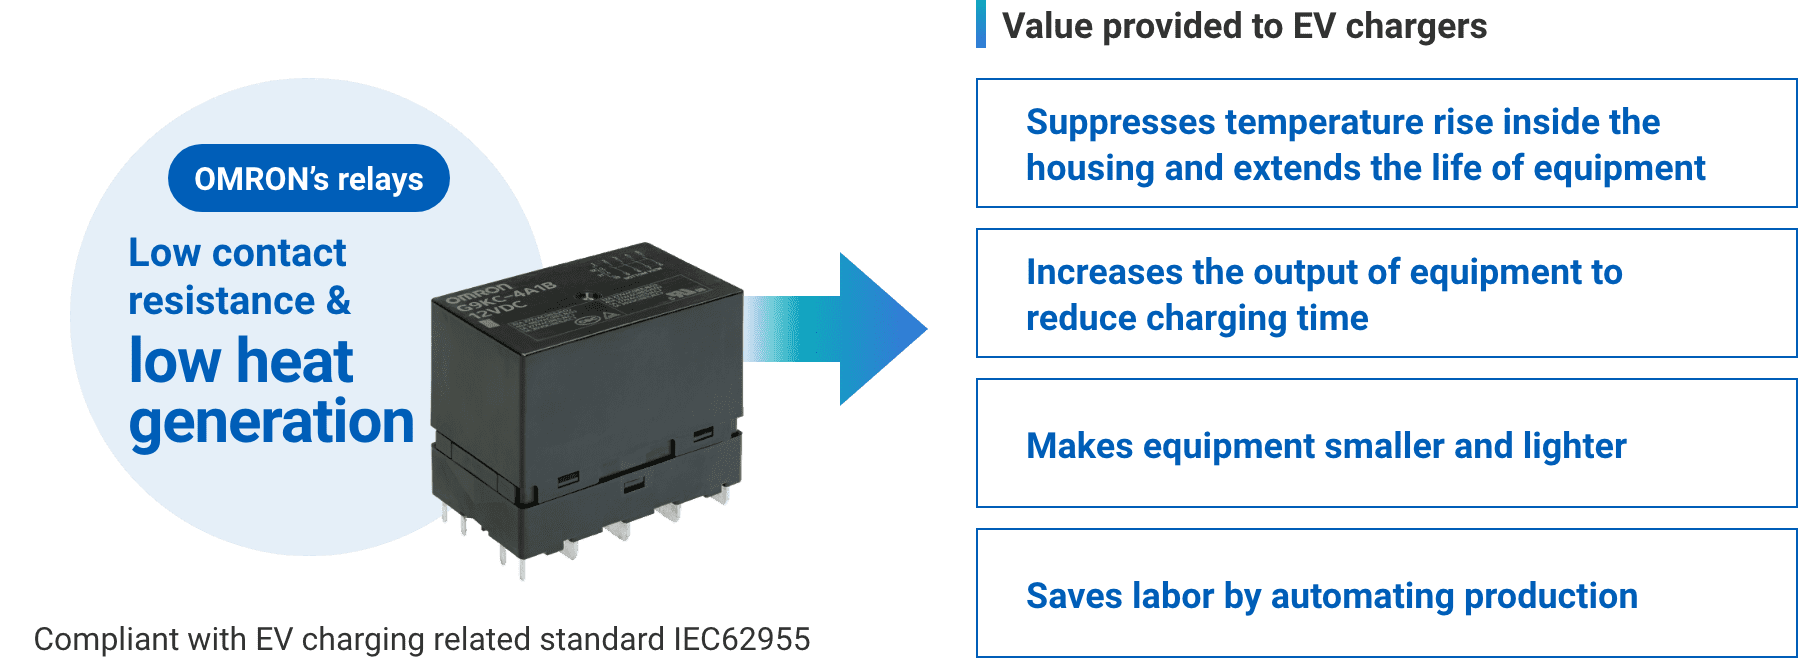 OMRON's relays: Low contact resistance & low heat generation => Value provided to EV chargers: (Suppresses temperature rise inside the housing and extends the life of equipment、Increases the output of equipment to reduce charging time、Makes equipment smaller and lighter、Saves labor by automating production) Compliant with EV charging related standard IEC6295